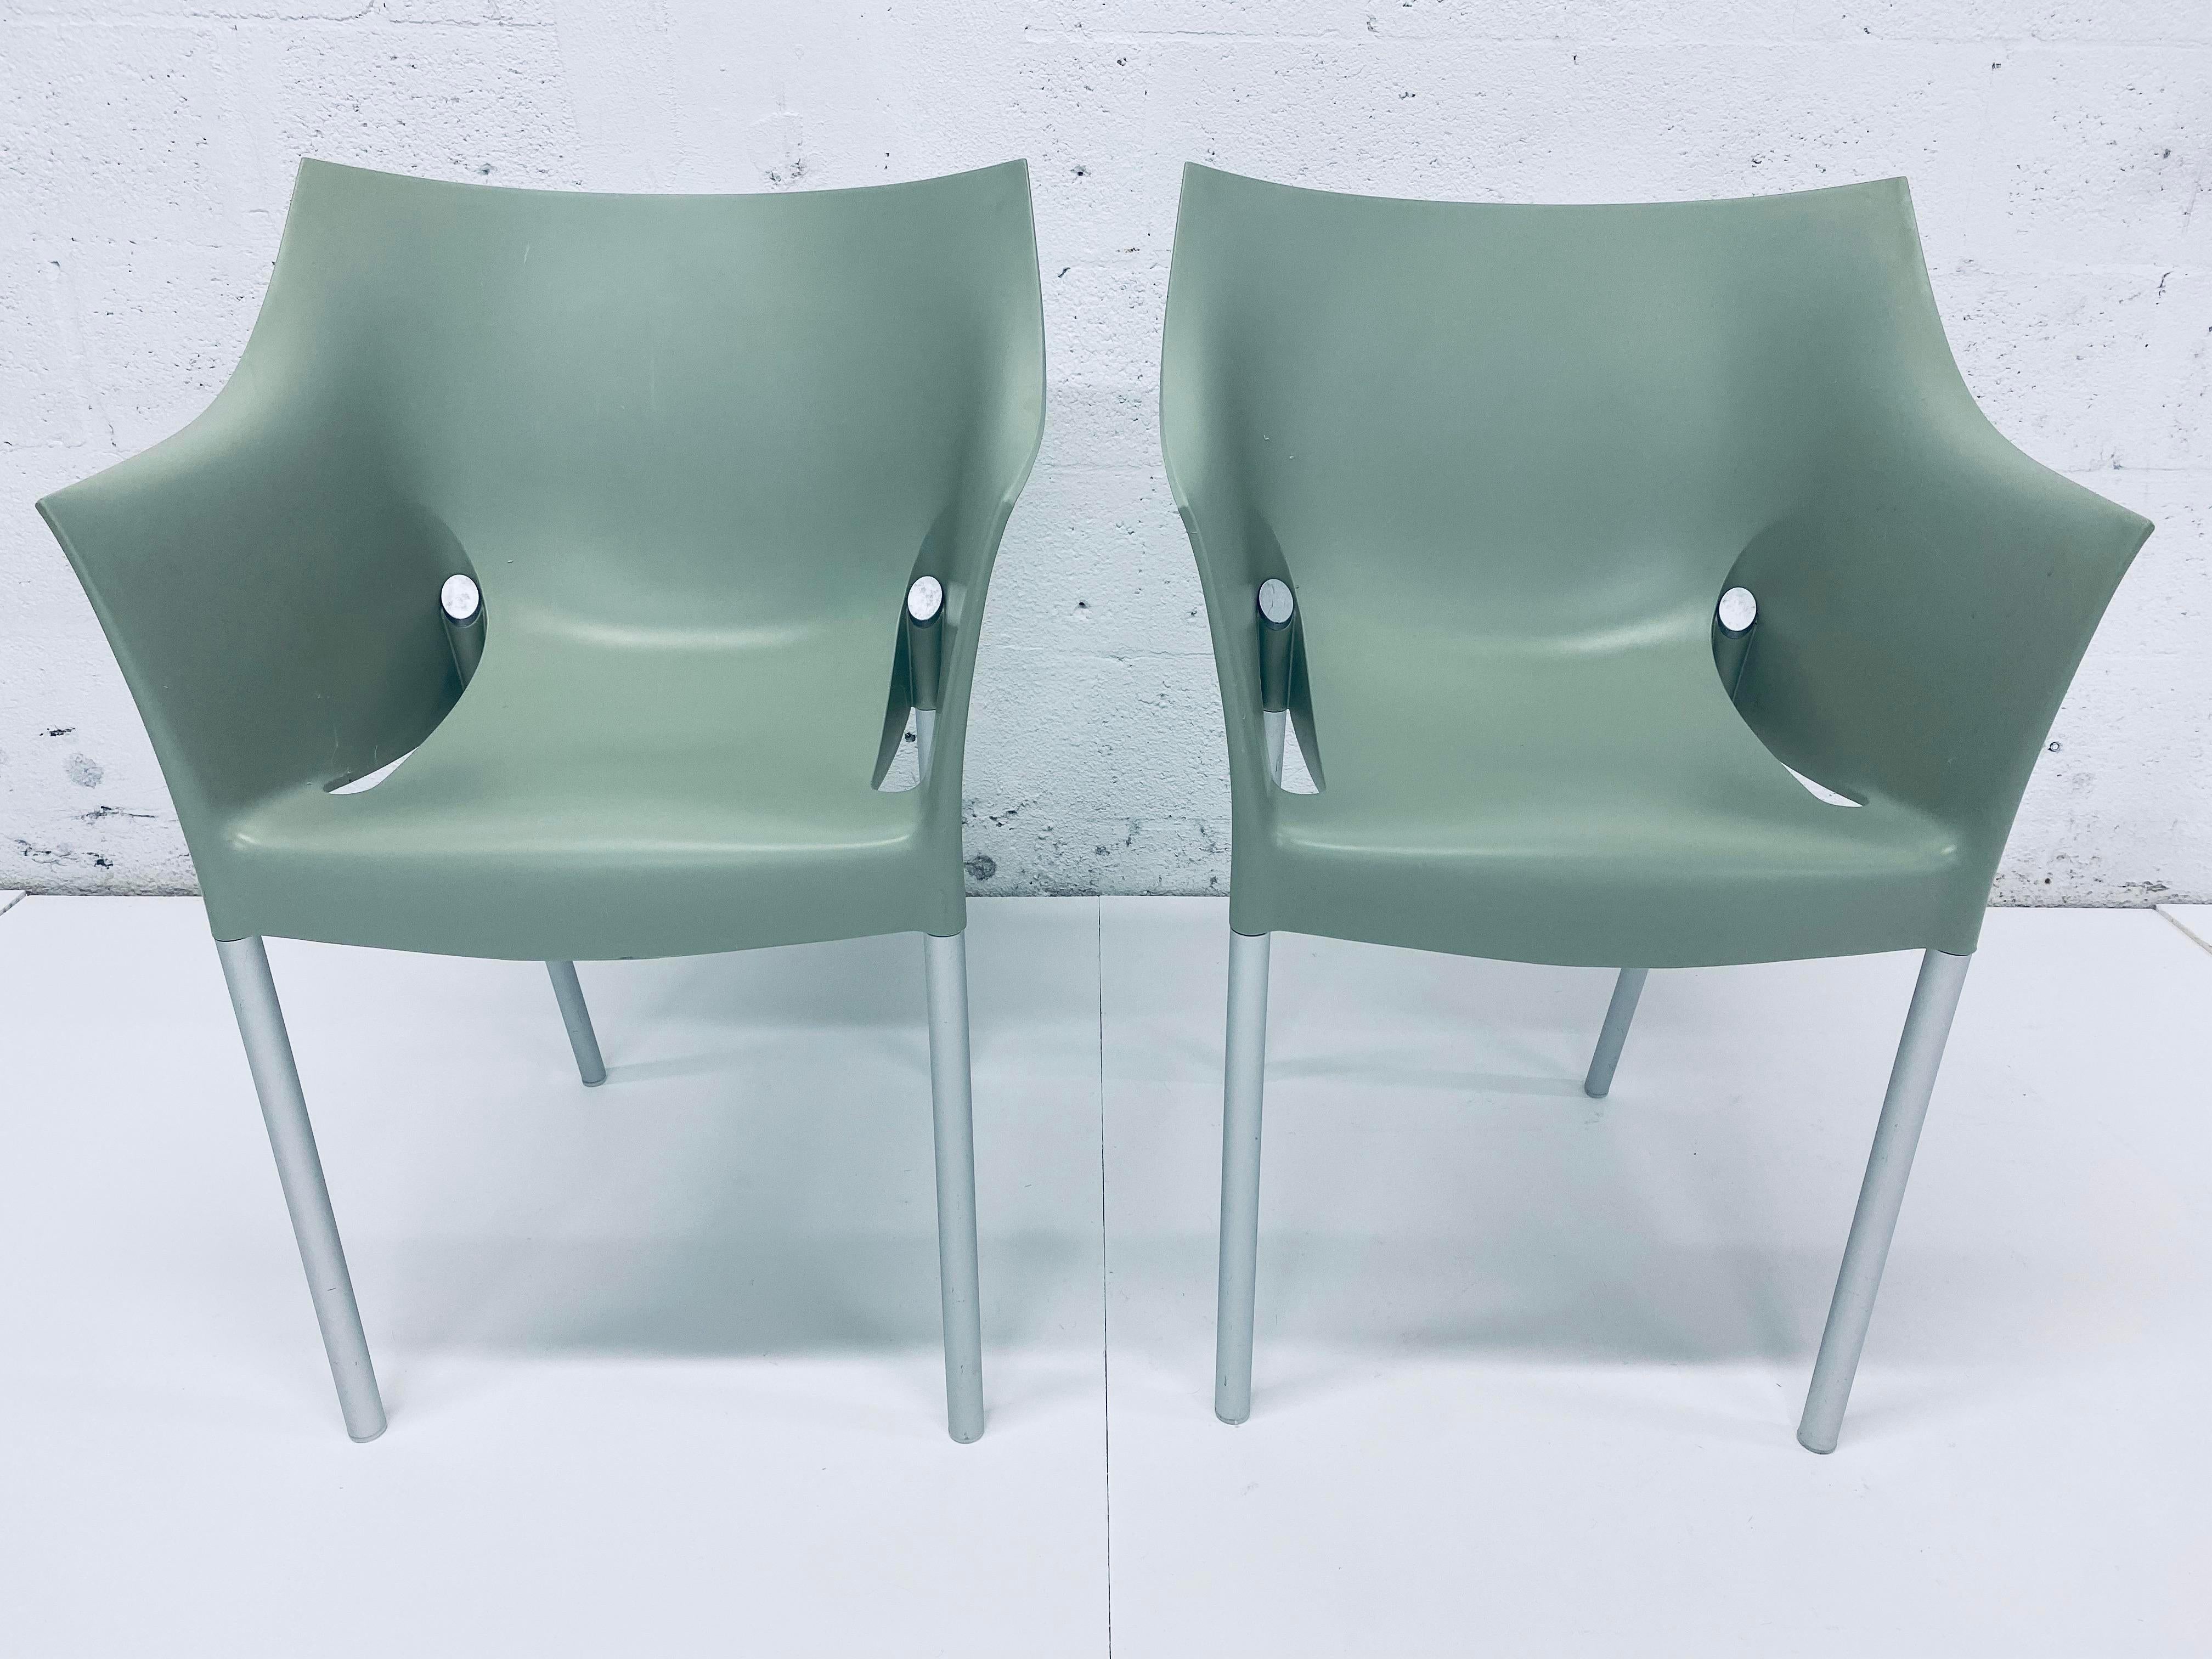 Set of fennel green Dr. No chairs with aluminum legs by Philippe Starck and produced by Kartell, Italy.